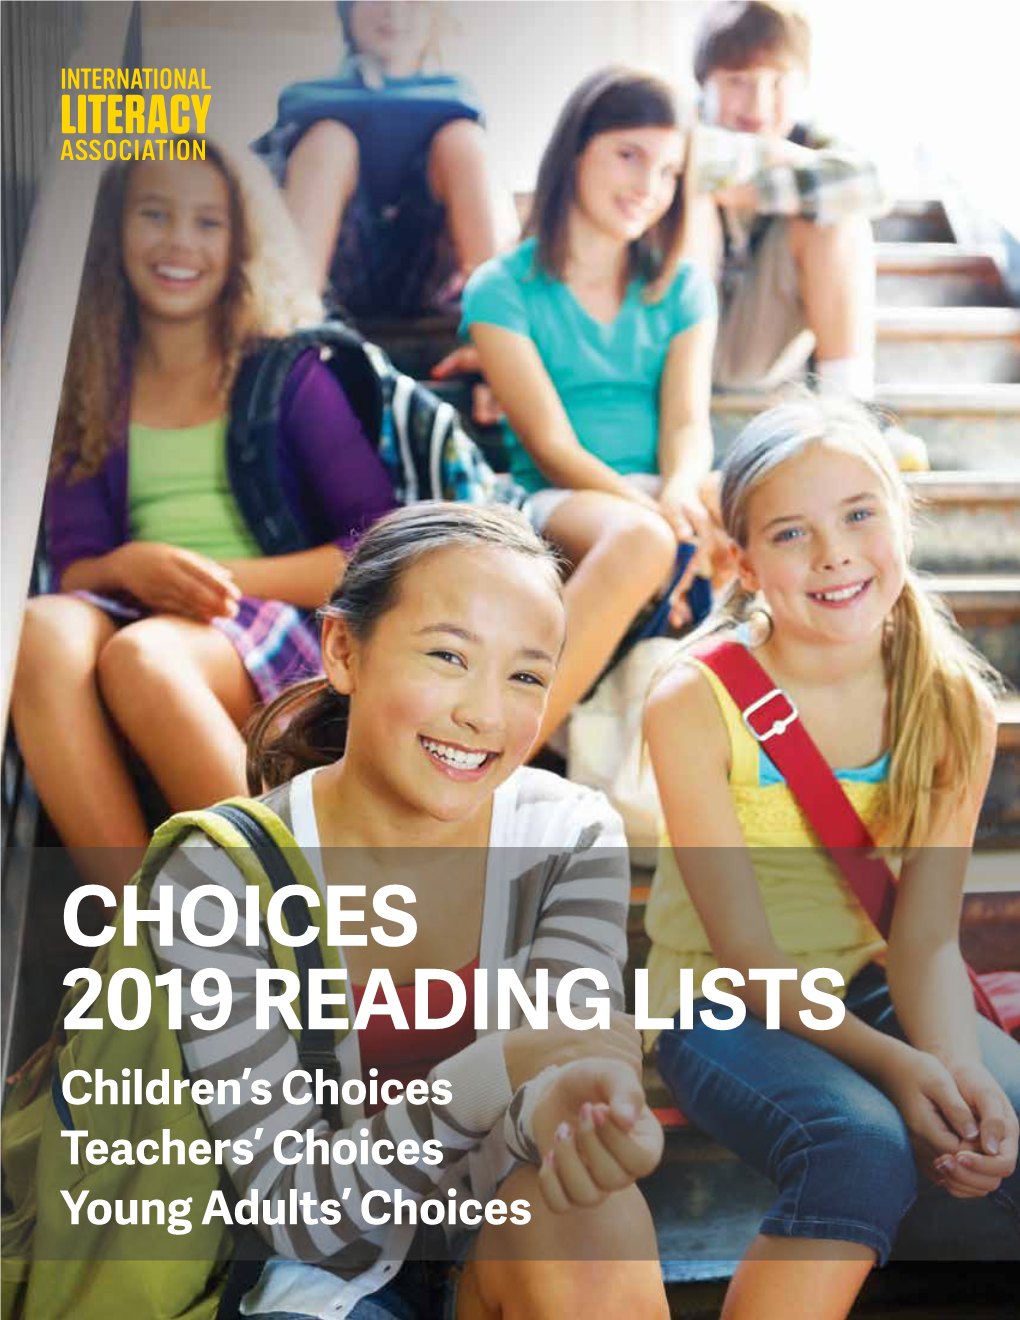 Choices 2019 Reading Lists